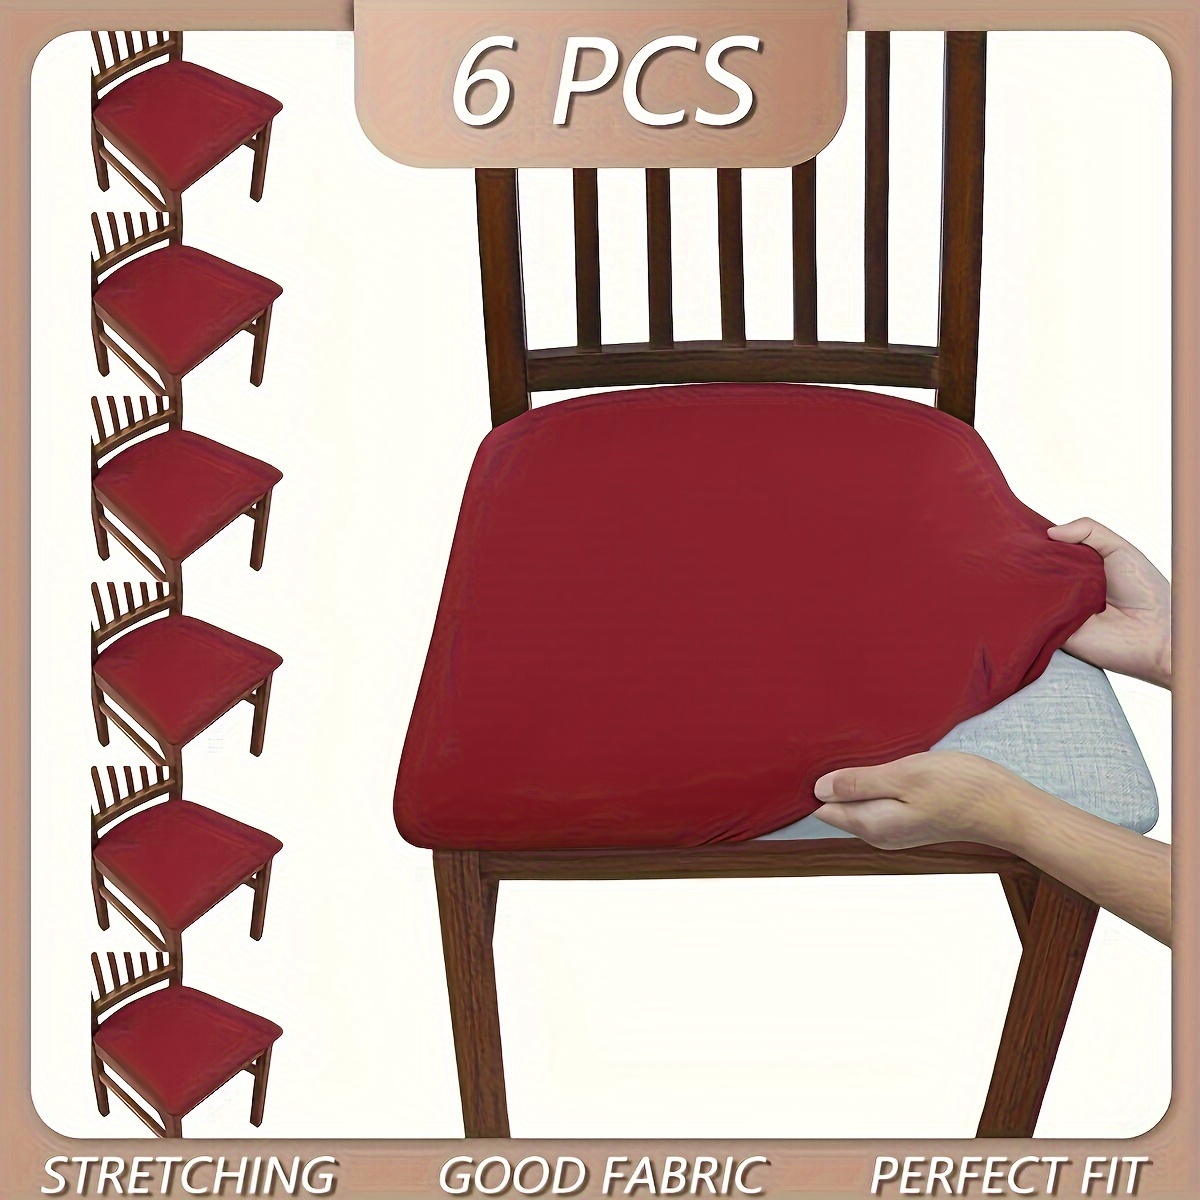 

4pcs/6pcs Solid Color Brushed High Elastic Chair Cover, Simple Soft And Comfortable Chair Seat Cover, Dust-proof And Dirt-resistant Chair Slipcover, Suitable For Dining Chair Office Home Decor